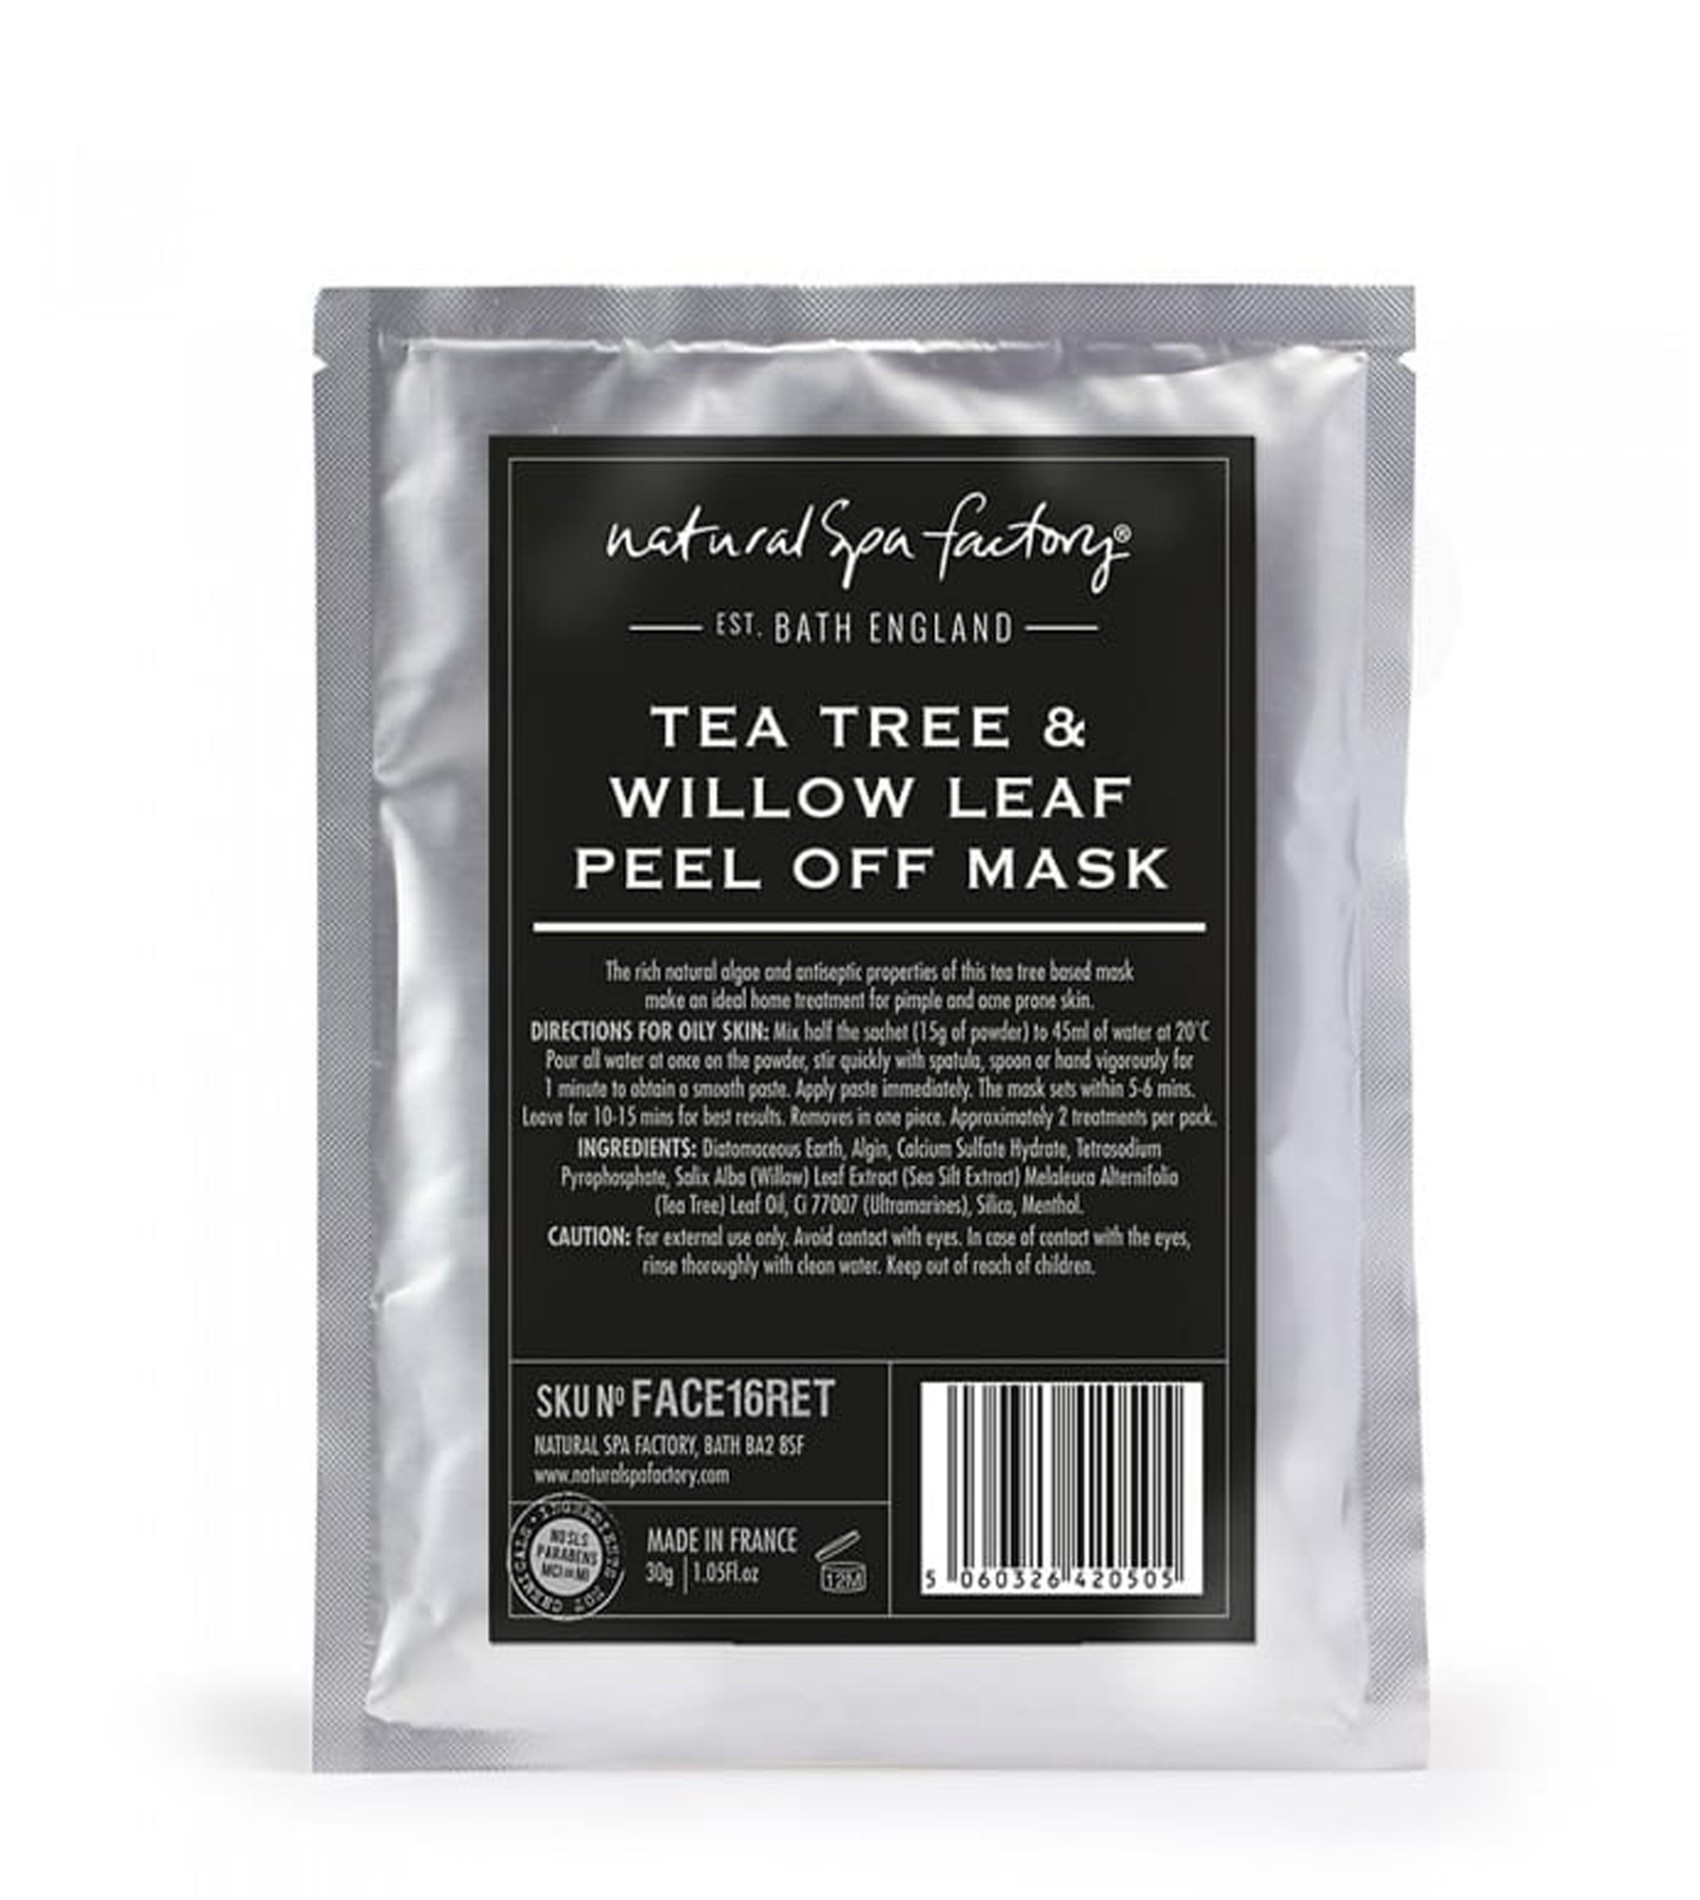 Natural Spa Factory Tea Tree & Willow Leaf Peel Off Mask 